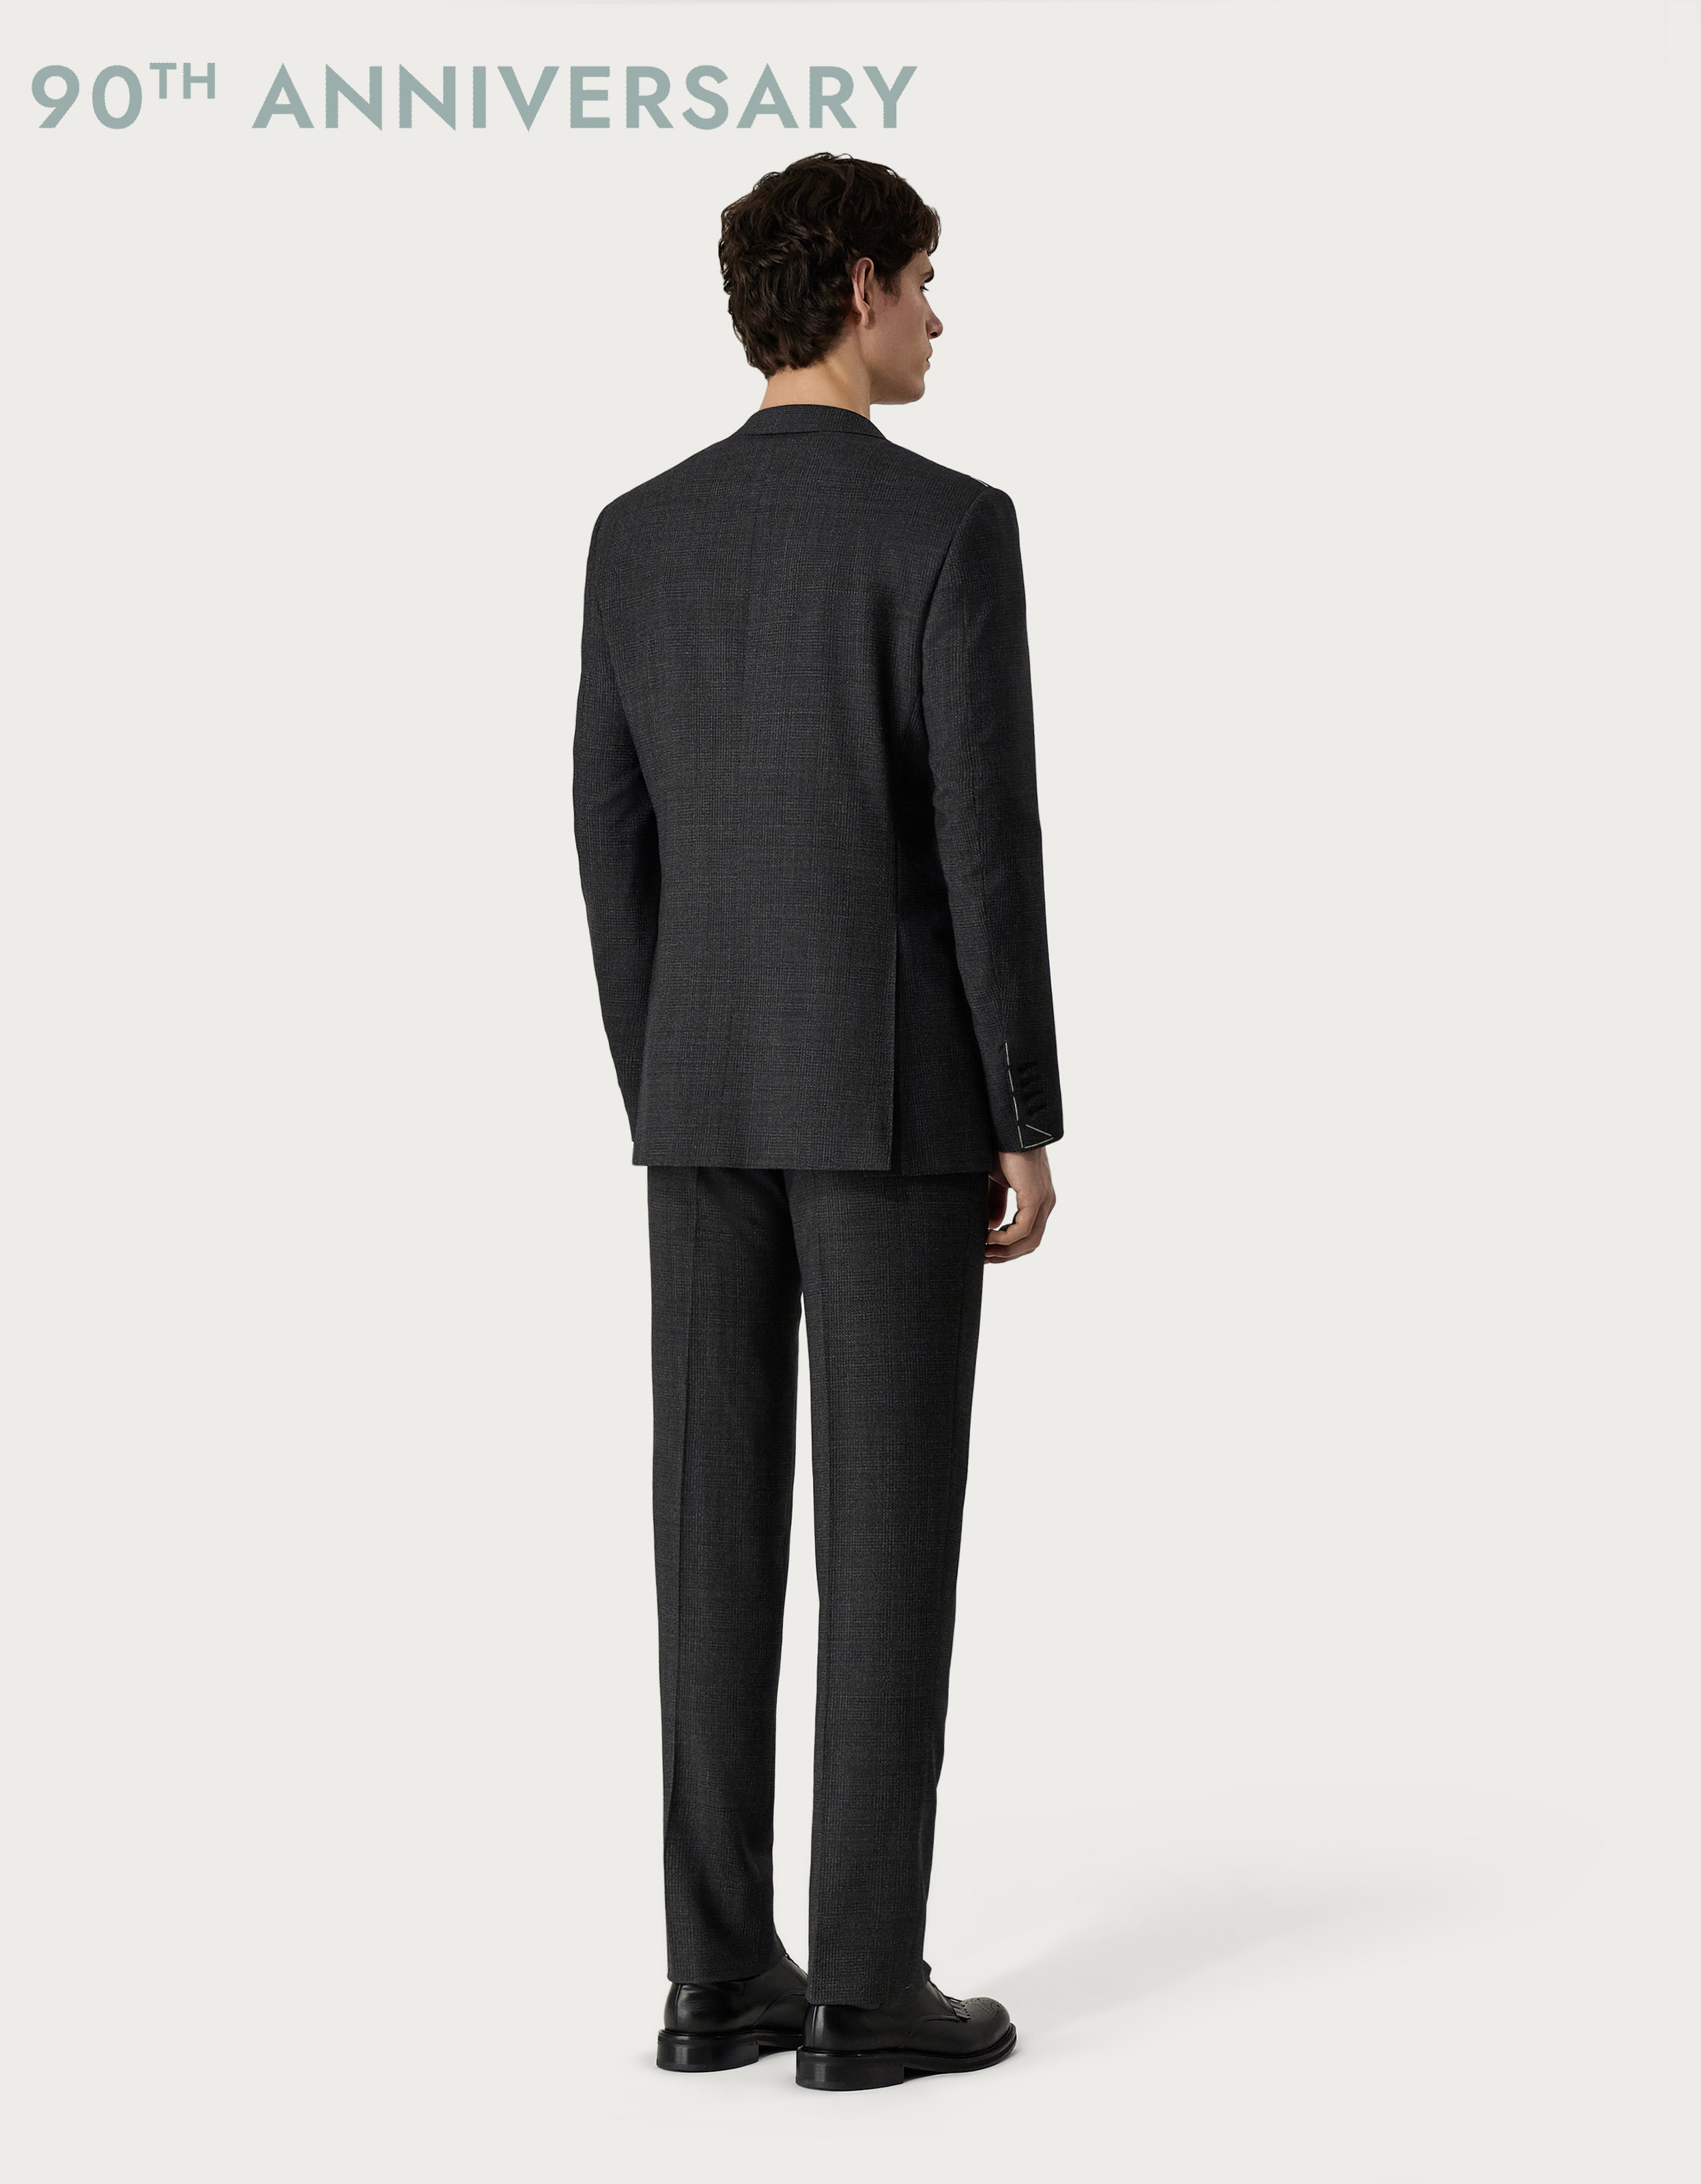 Men's wool suit anthracite in a regular fit - Canali CH